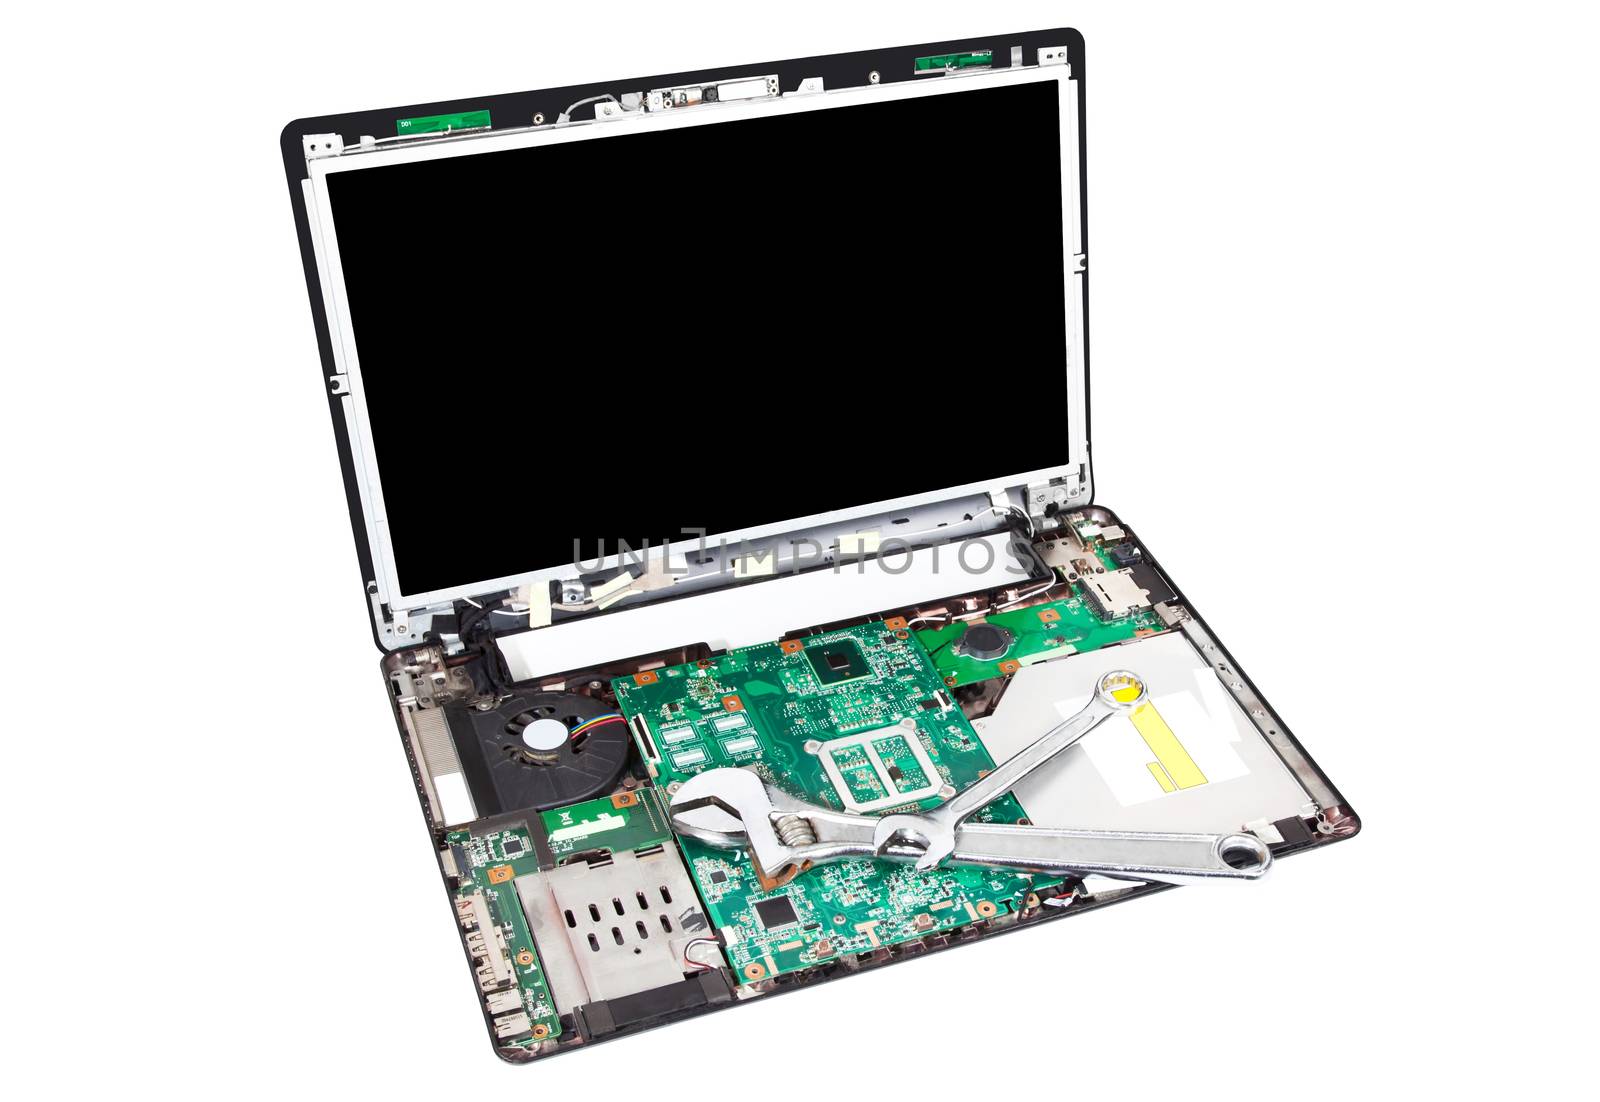 Laptop disassembled with wrench on it by RawGroup